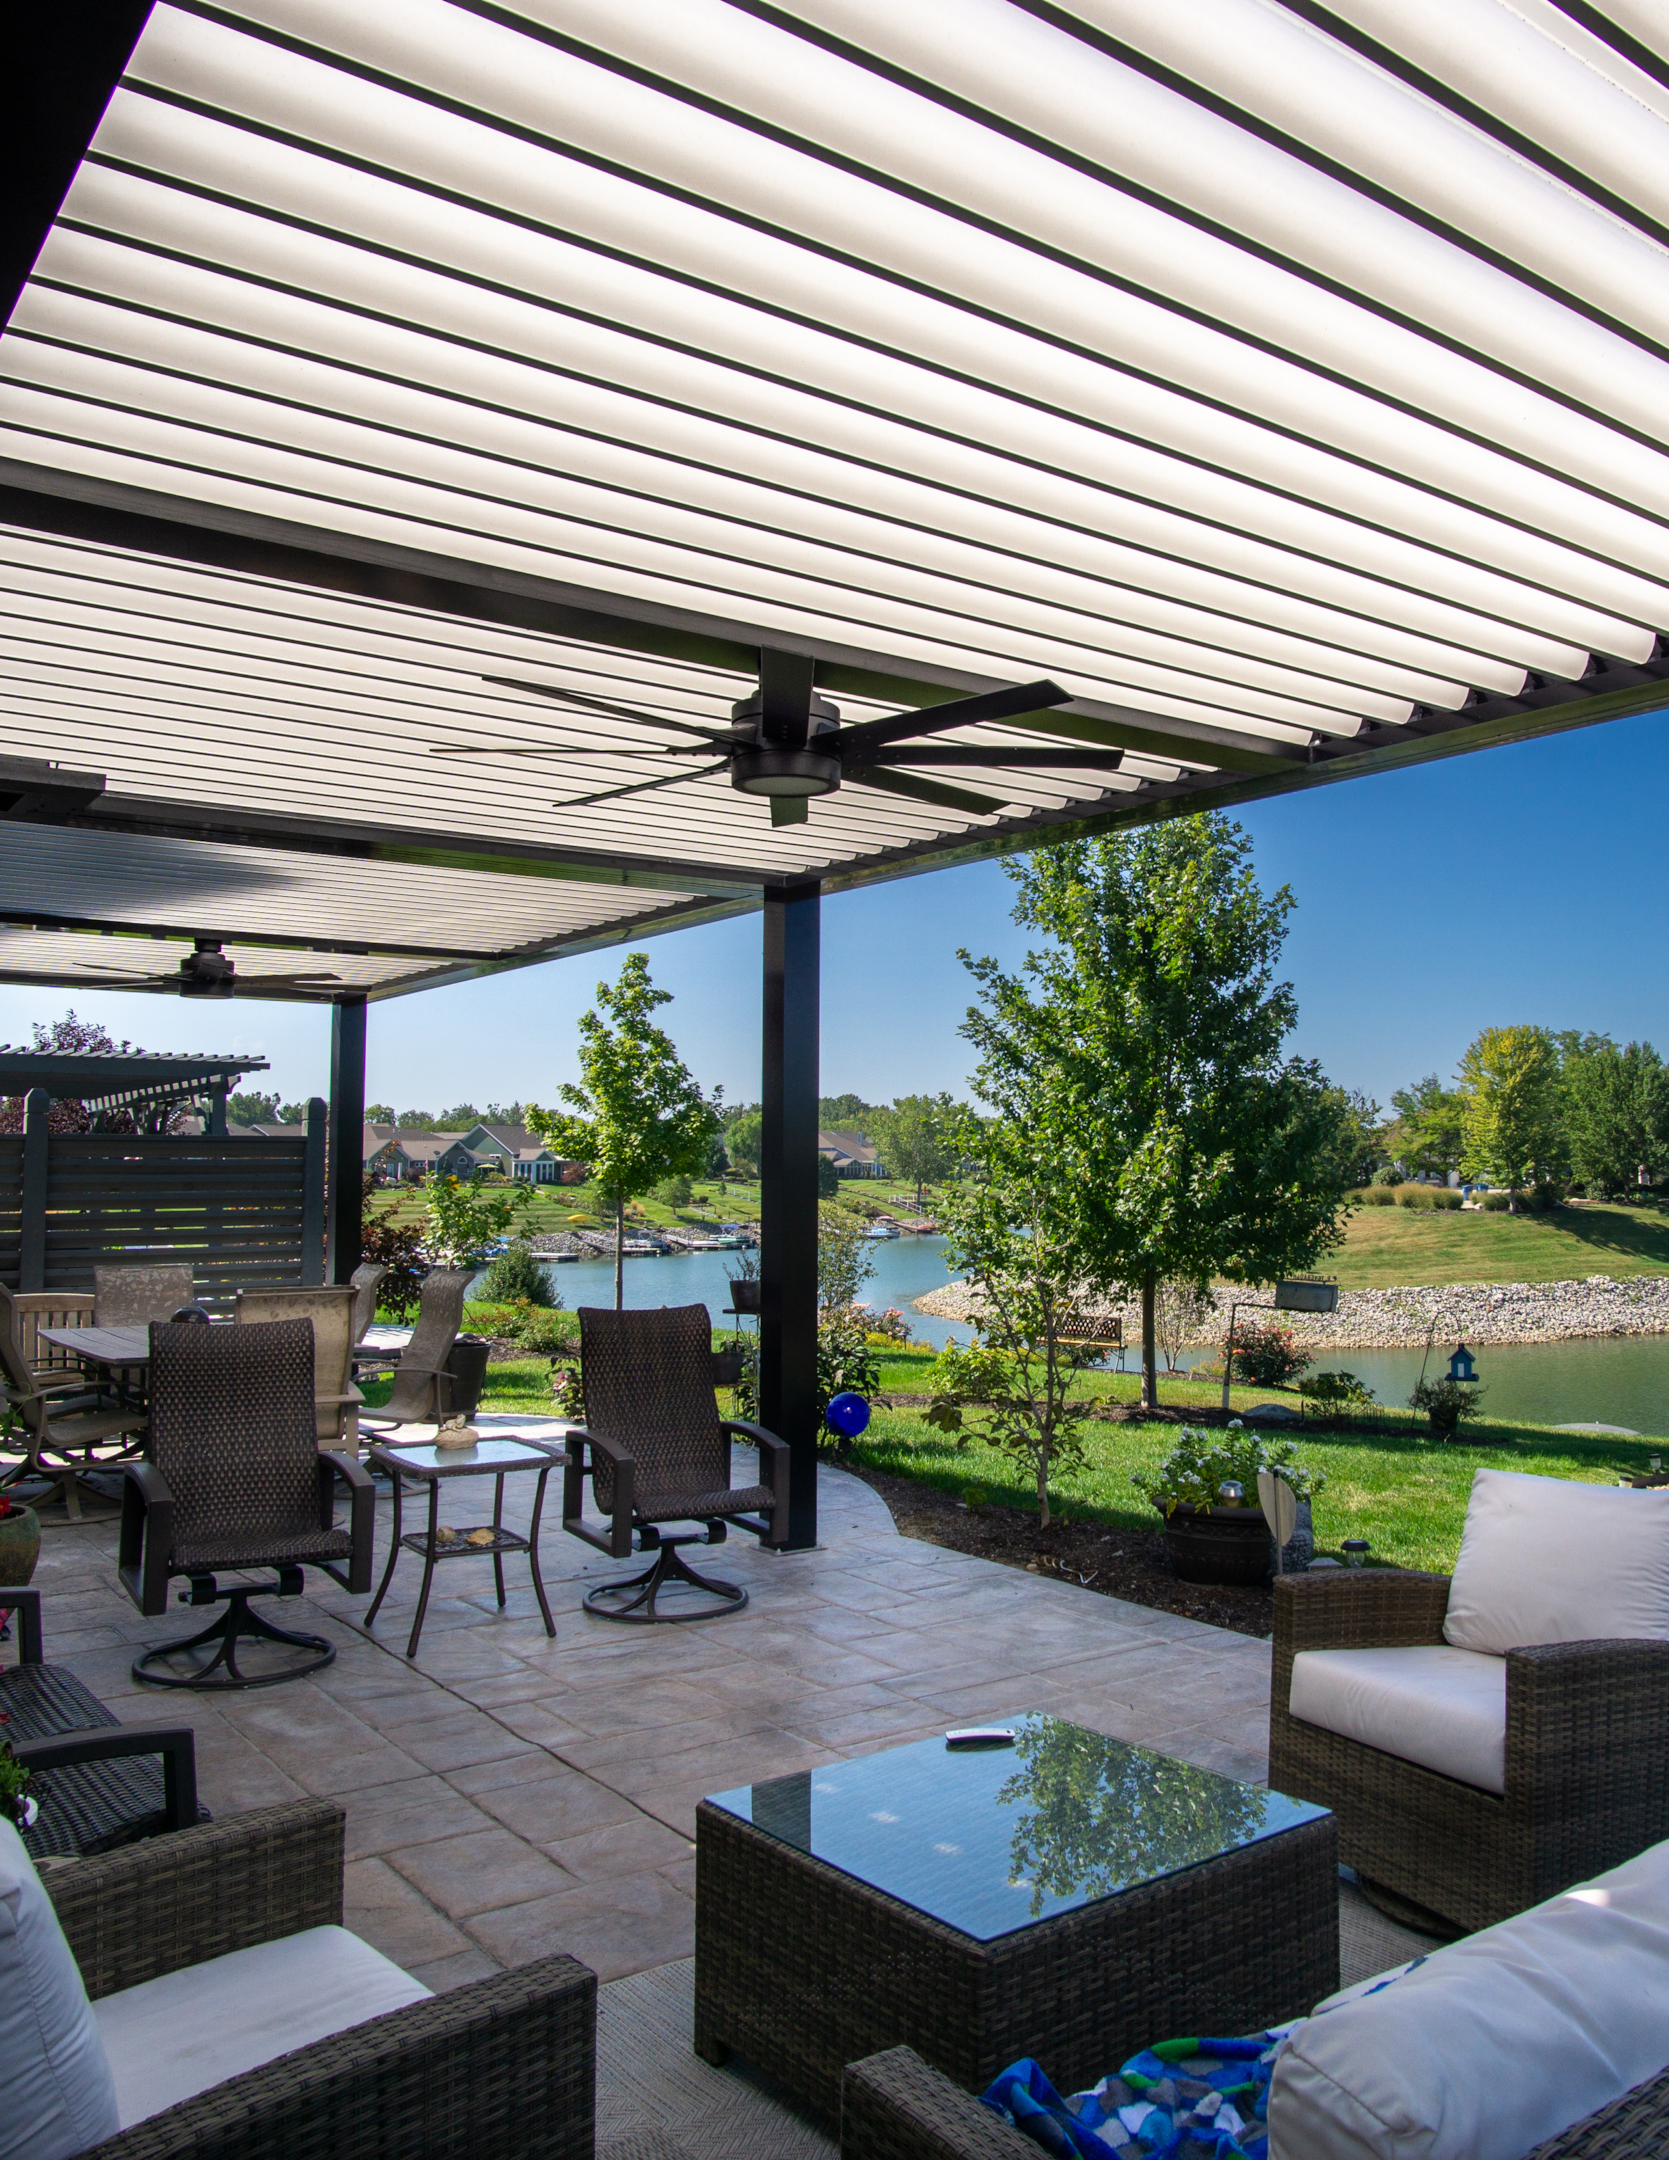 Outside living space made better with furniture features under pergola with louvered roof